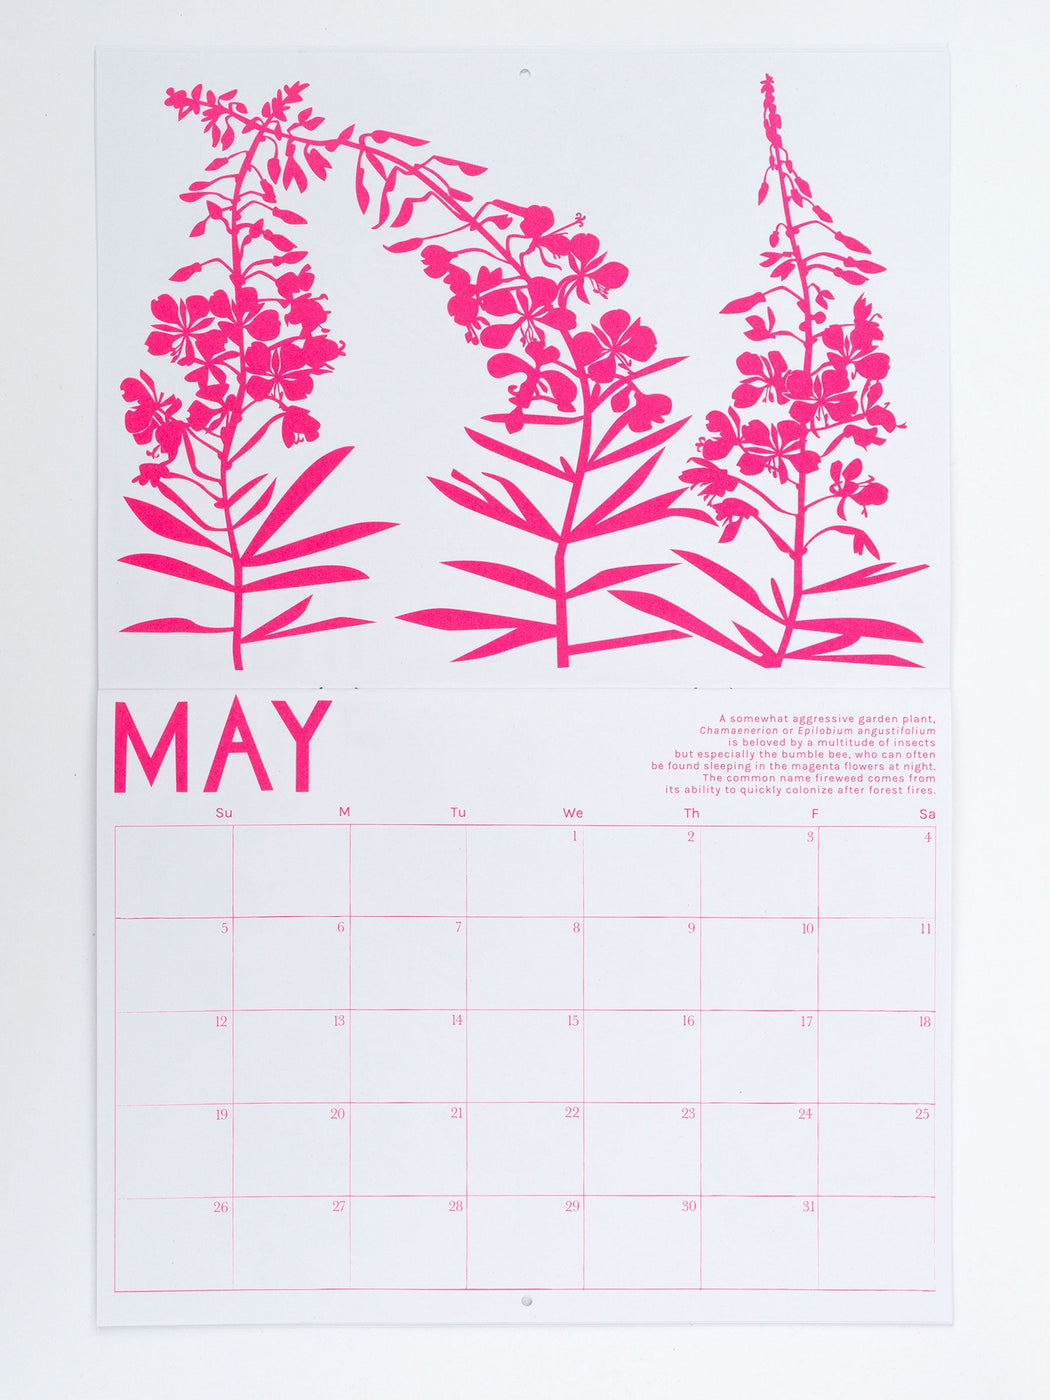 May features neon pink Fireweed